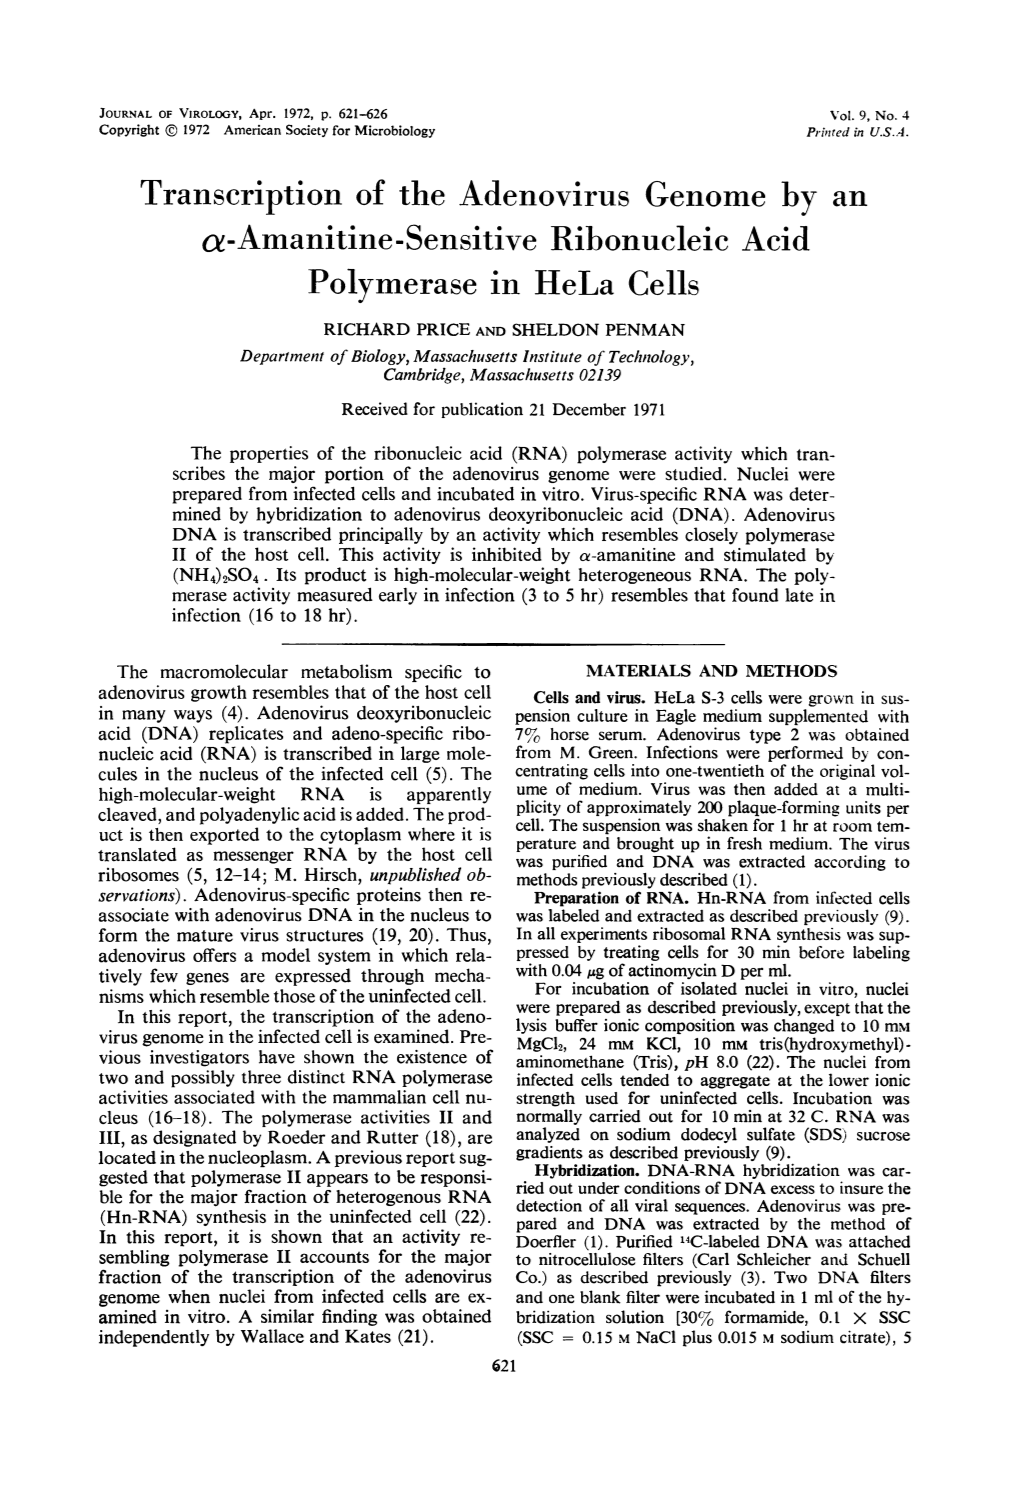 Transcription of the Adenovirus Genome by an A-Amanitine-Sensitive Ribonucleic Acid Polymerase in Hela Cells